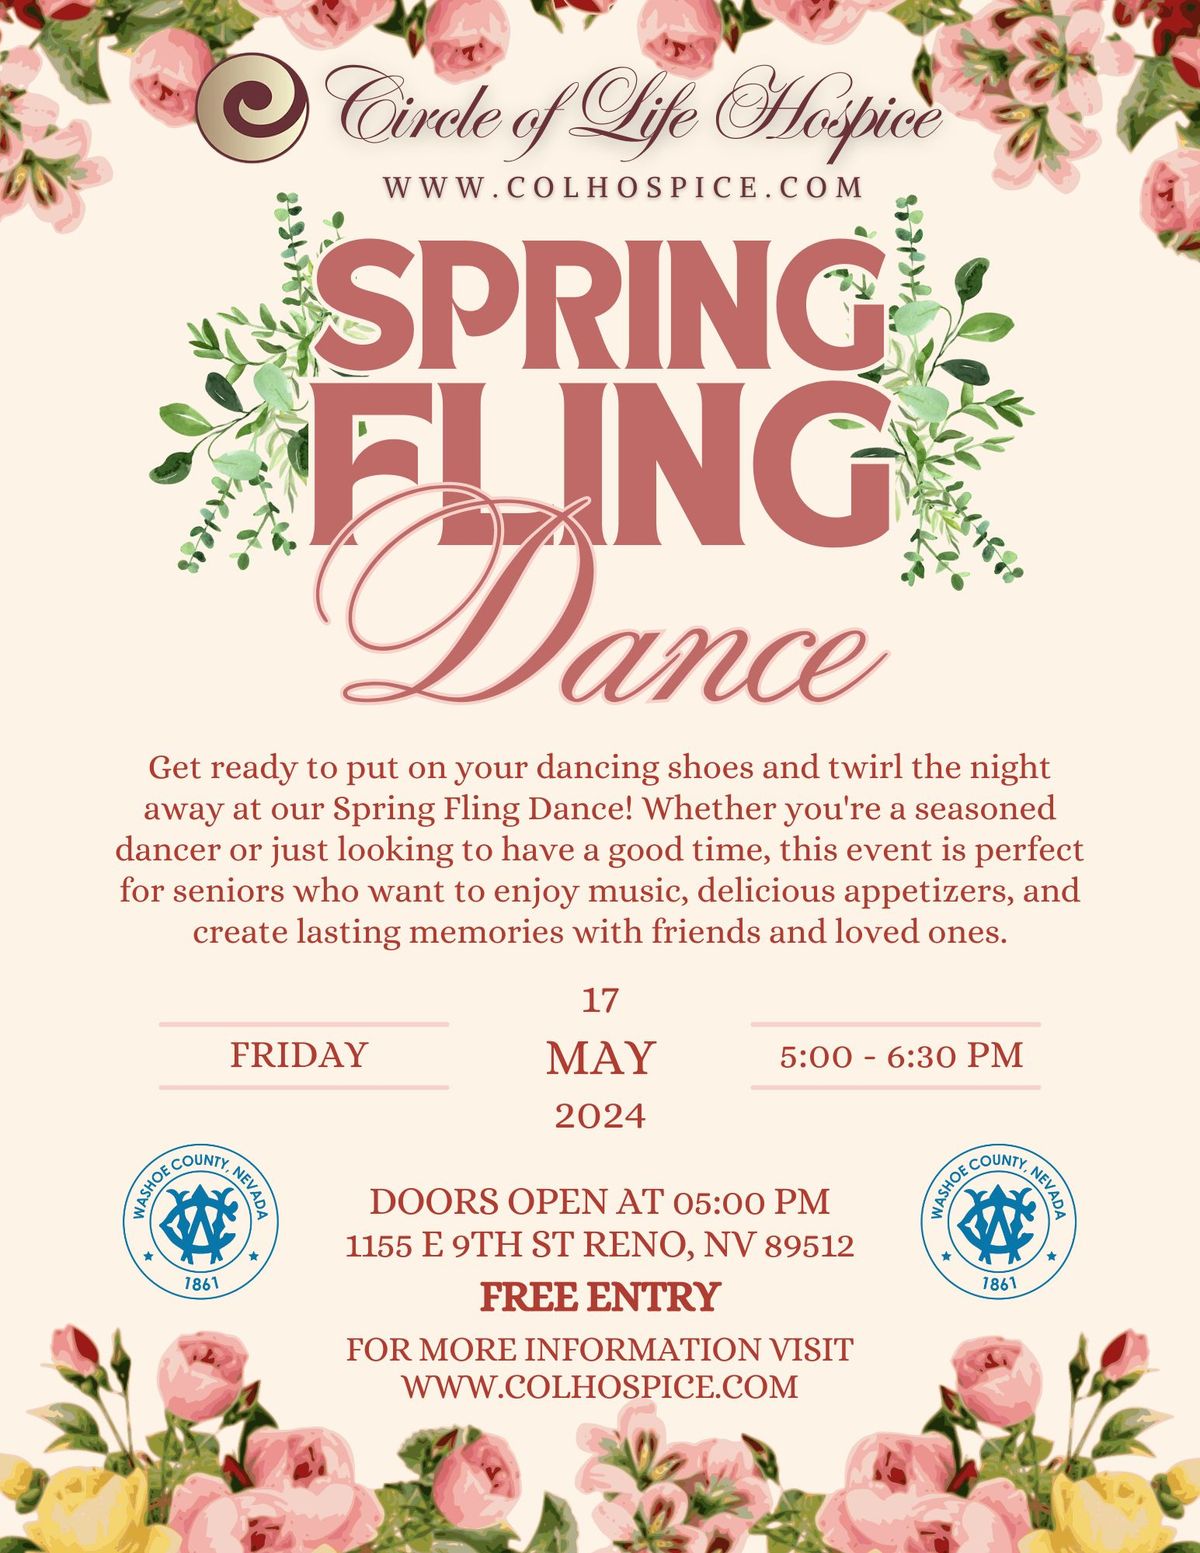 Spring Fling Dance from Circle of Life Hospice & Washoe County Senior Services